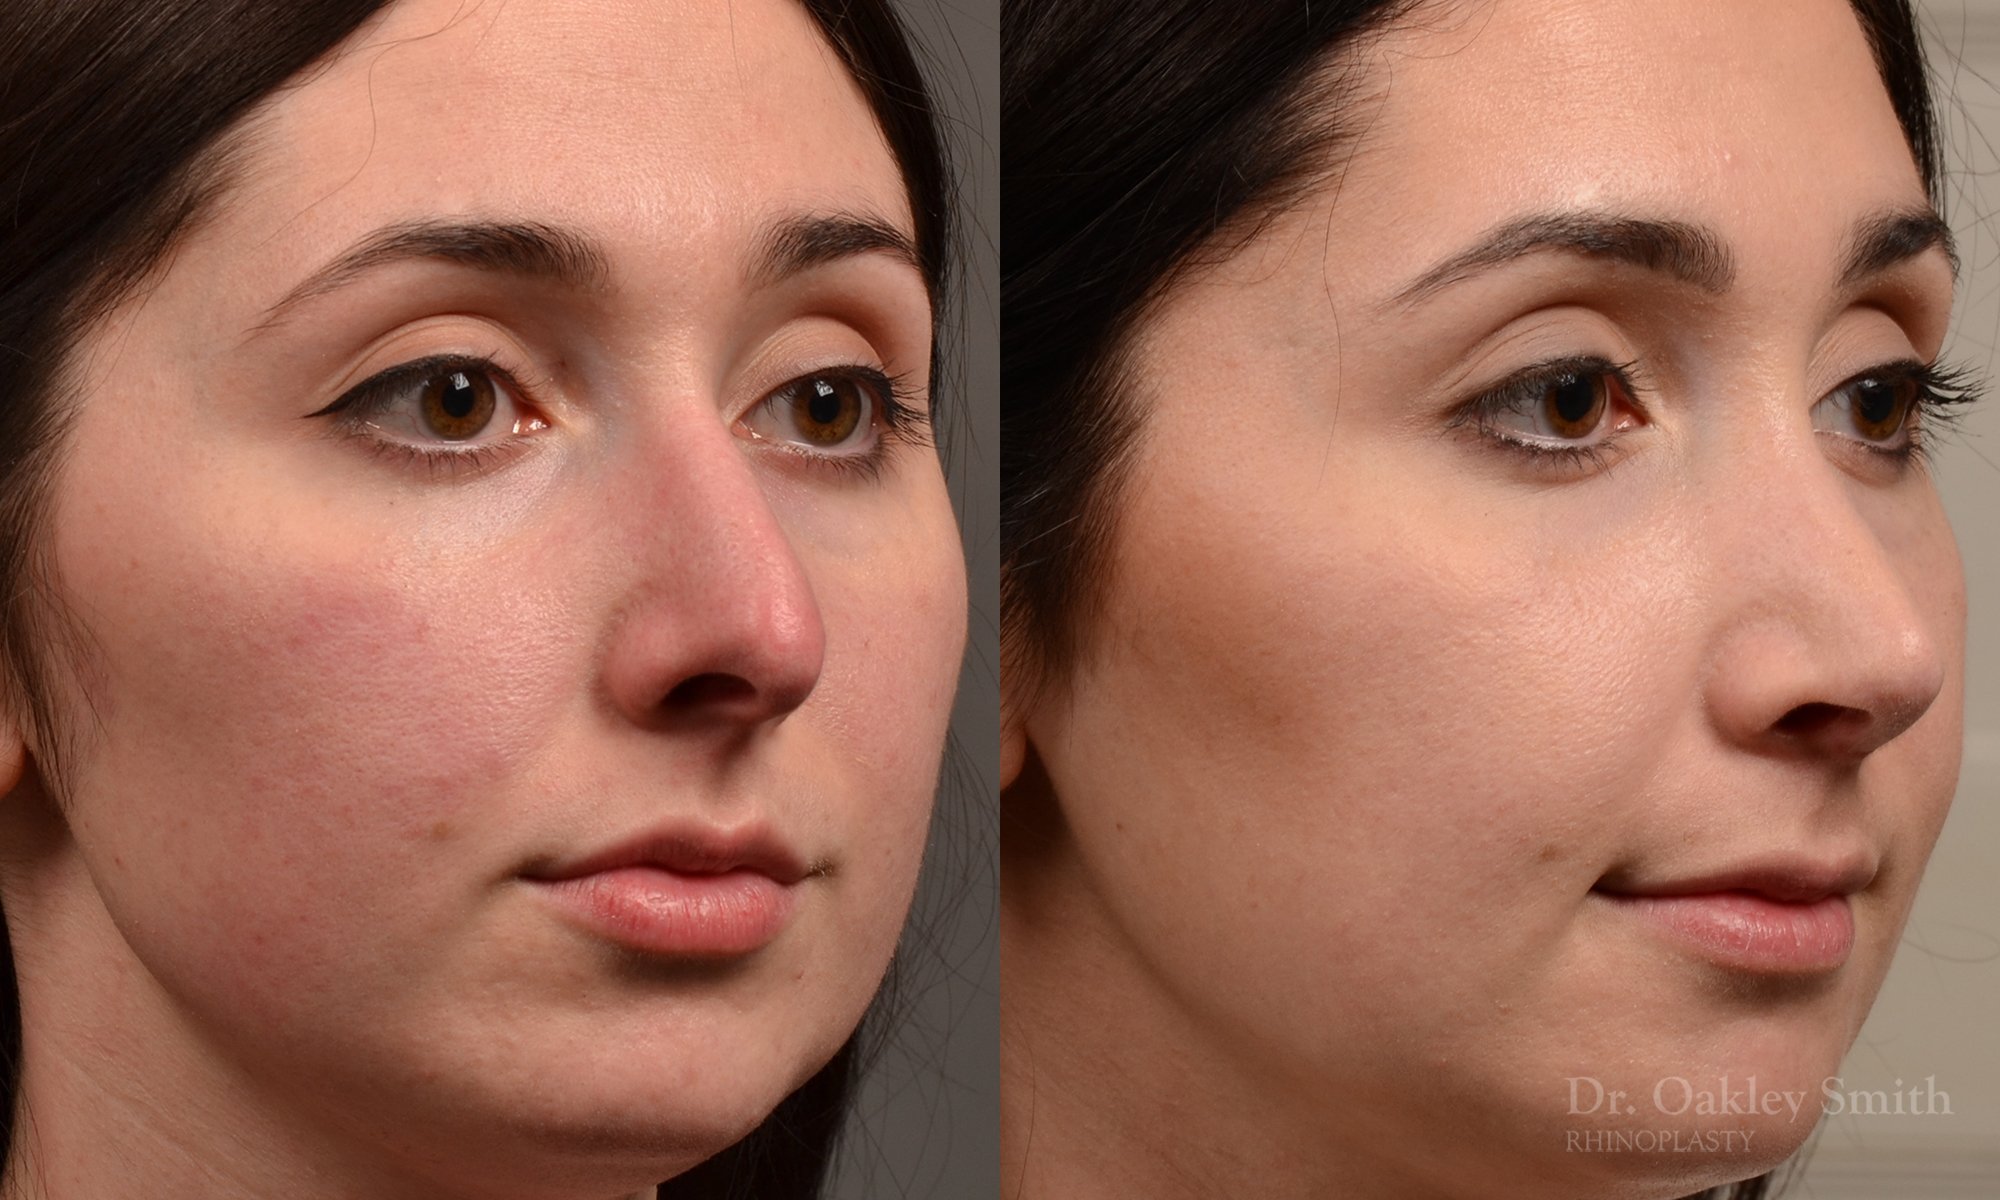 Rhinoplasty - Rhinoplasty Before and After Case 476